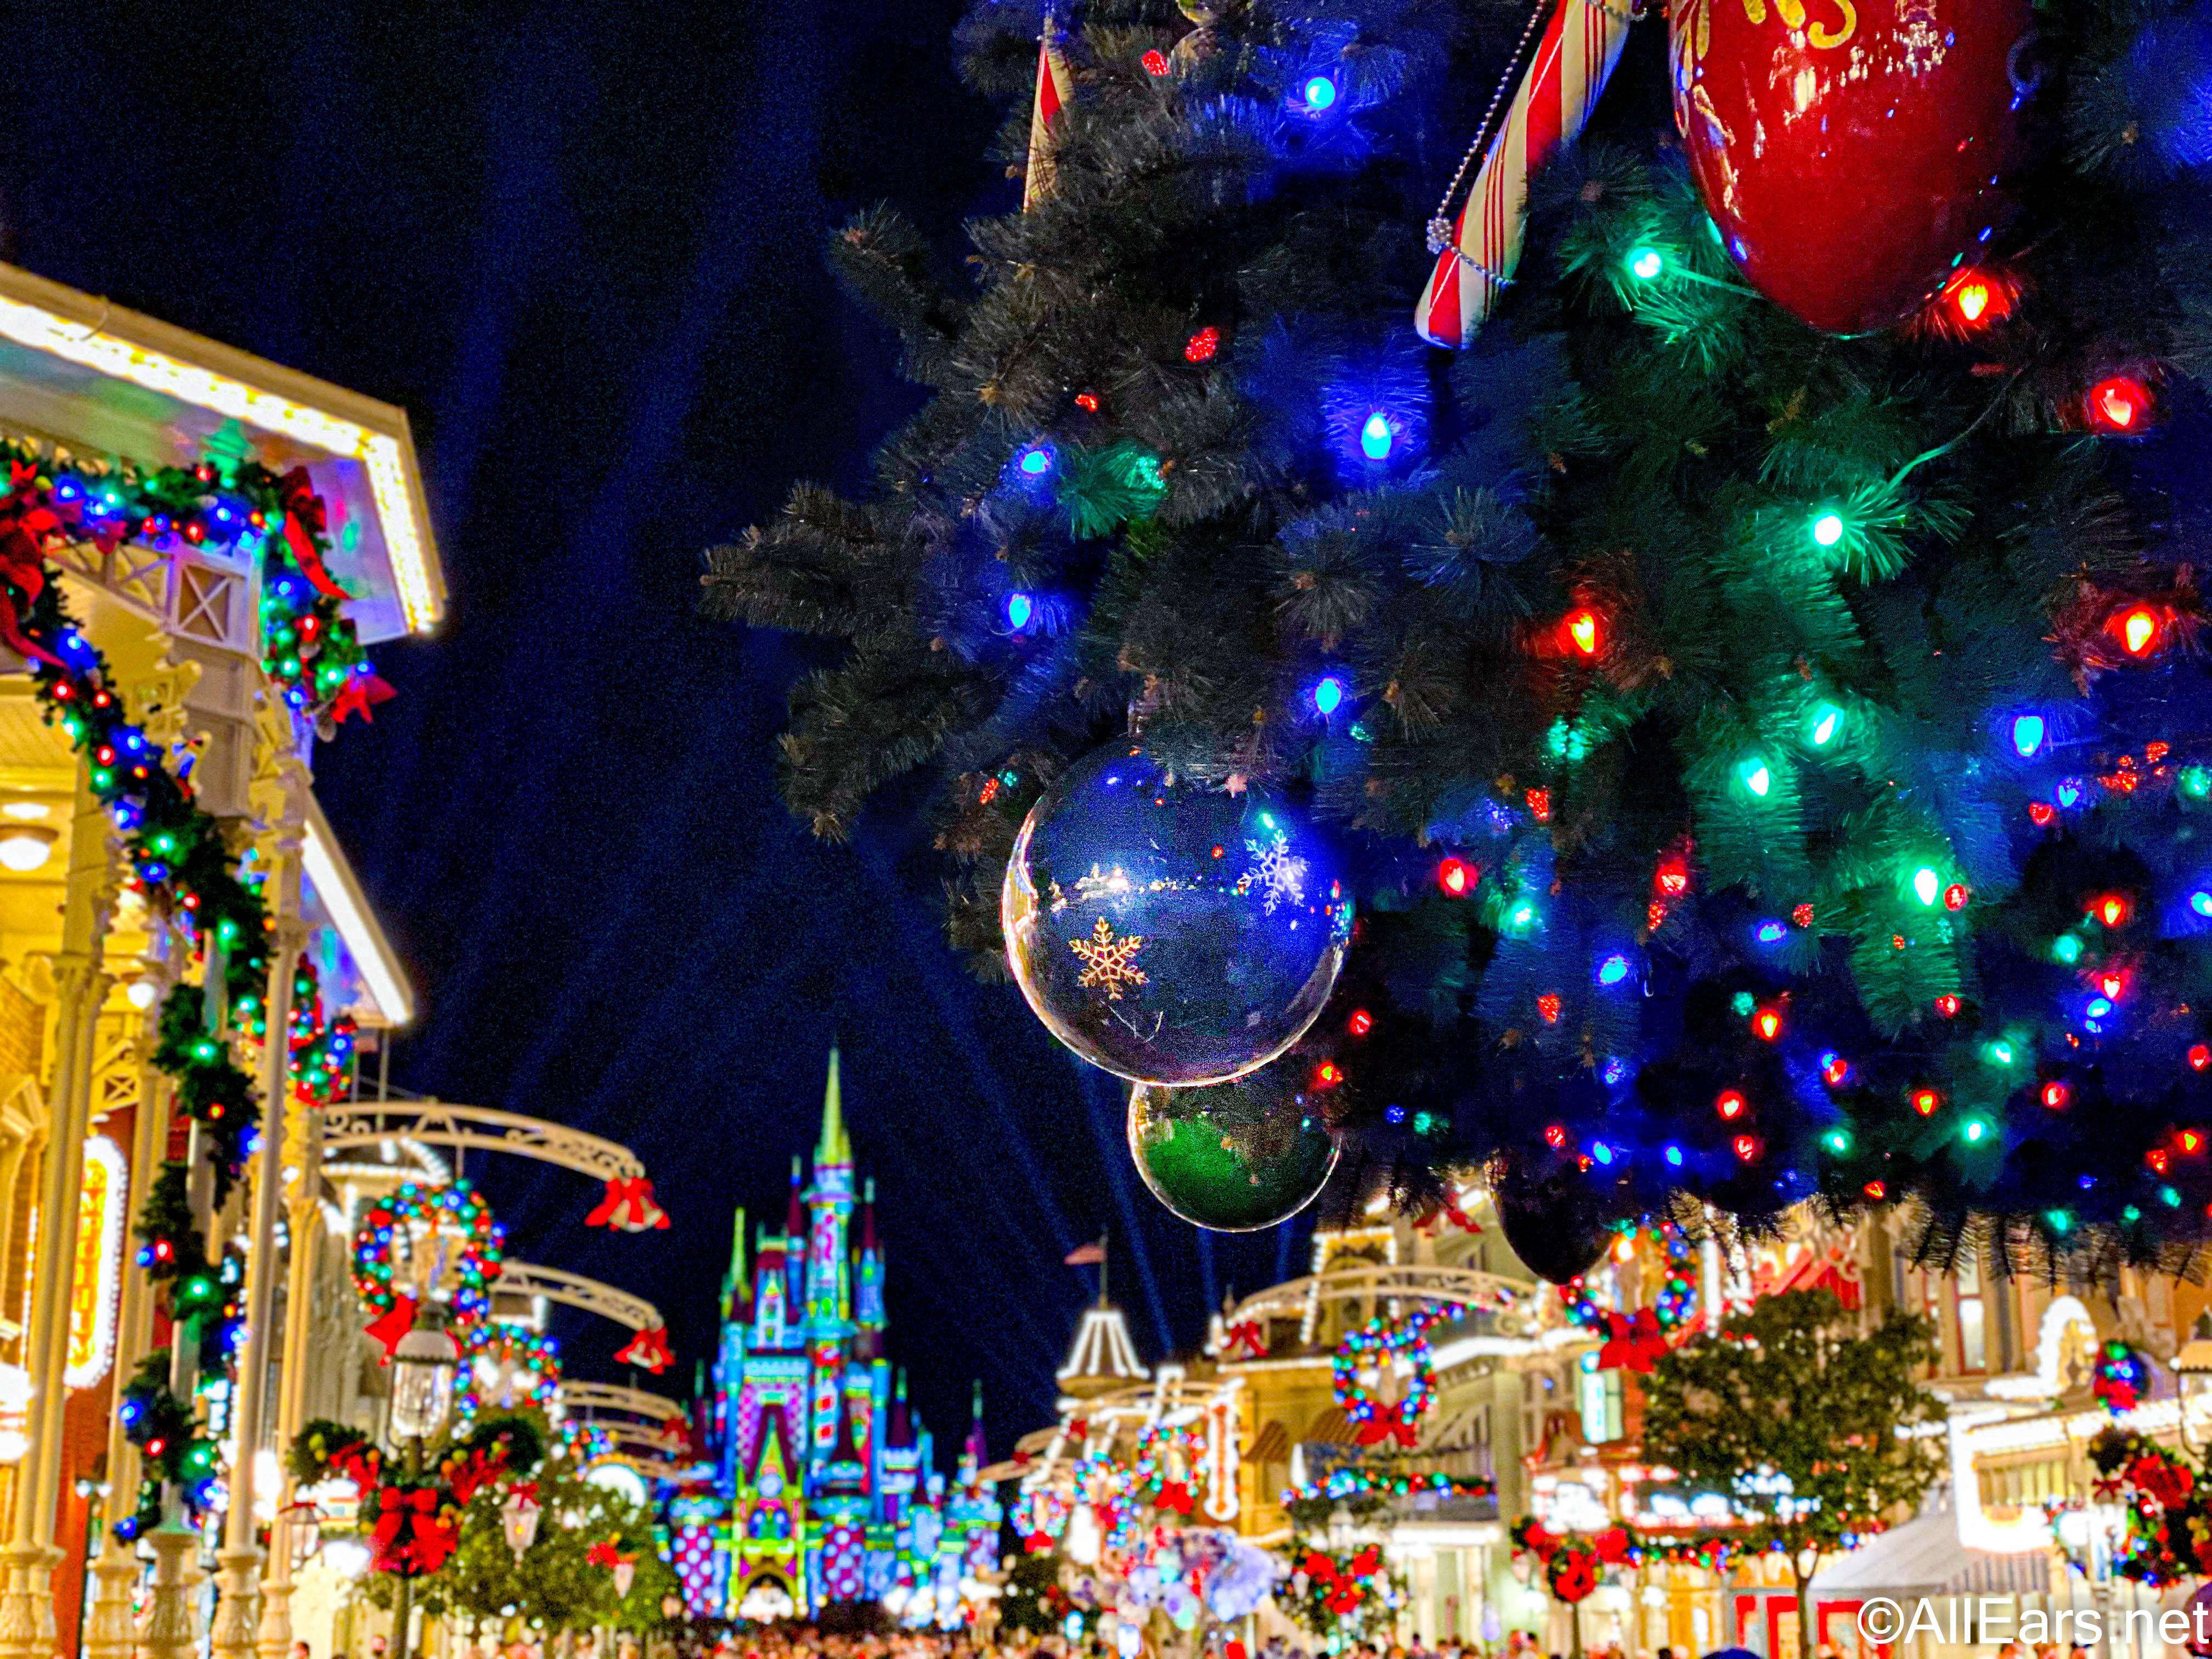 Ð disney world holiday wallpapers ðthat will instantly make your phone or desktop magical